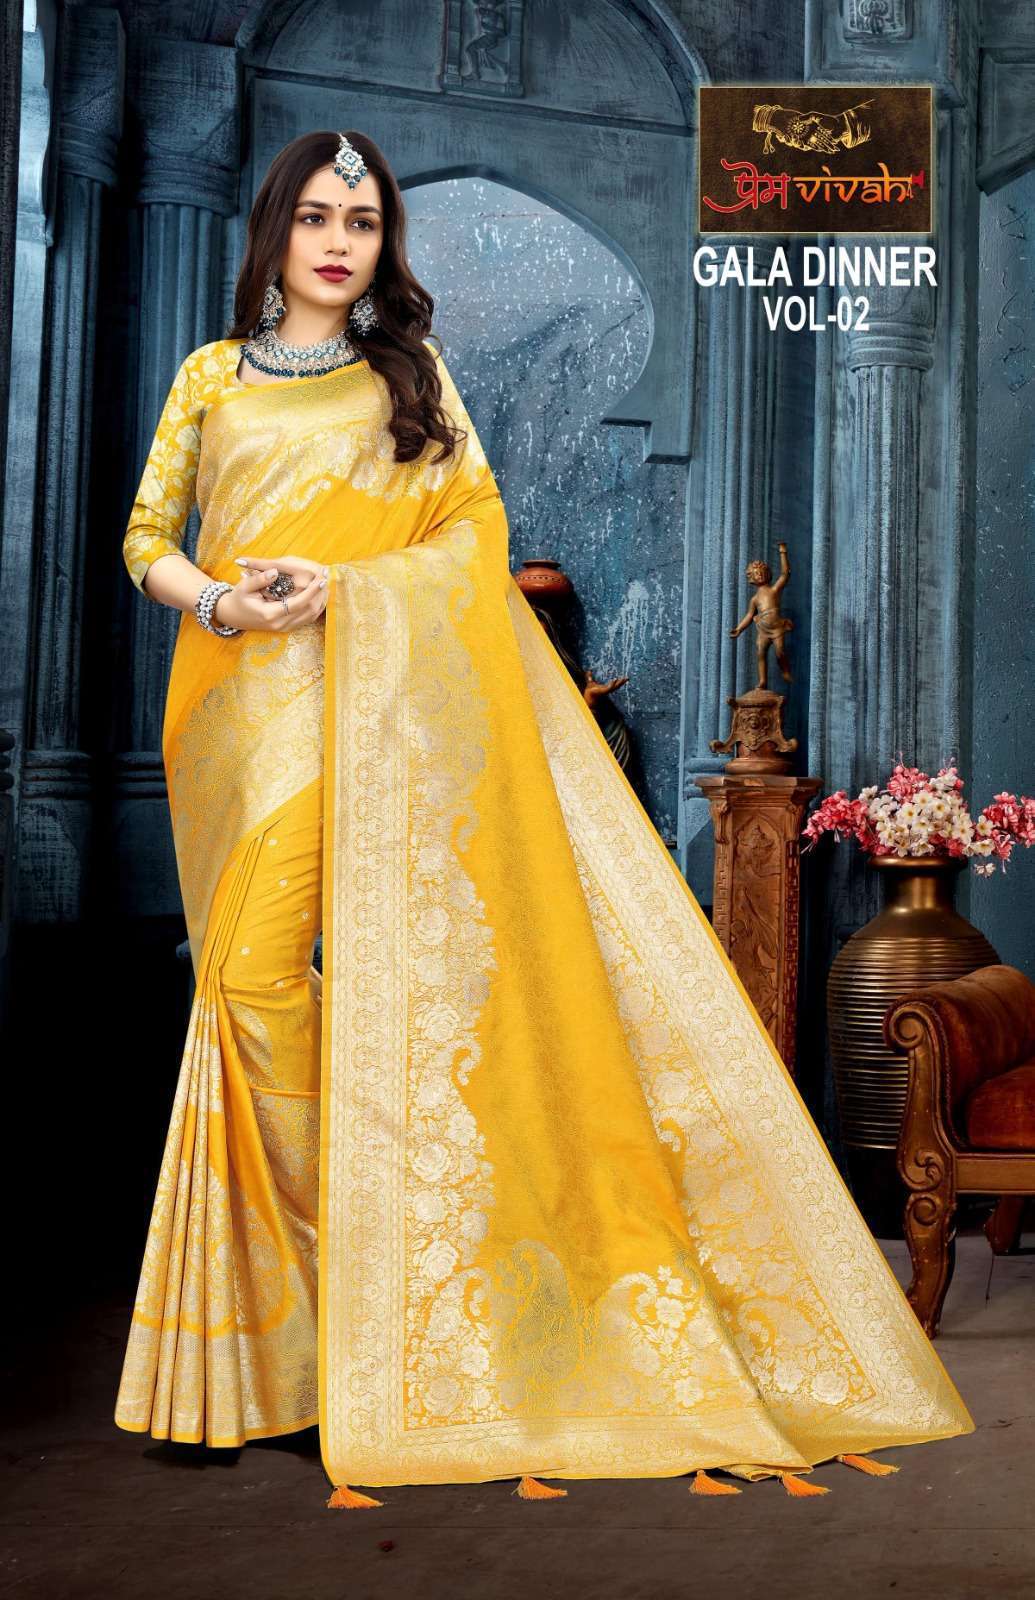 Party Wear Saree - Buy Latest Party Wear Sarees Online at Discounted Rates.